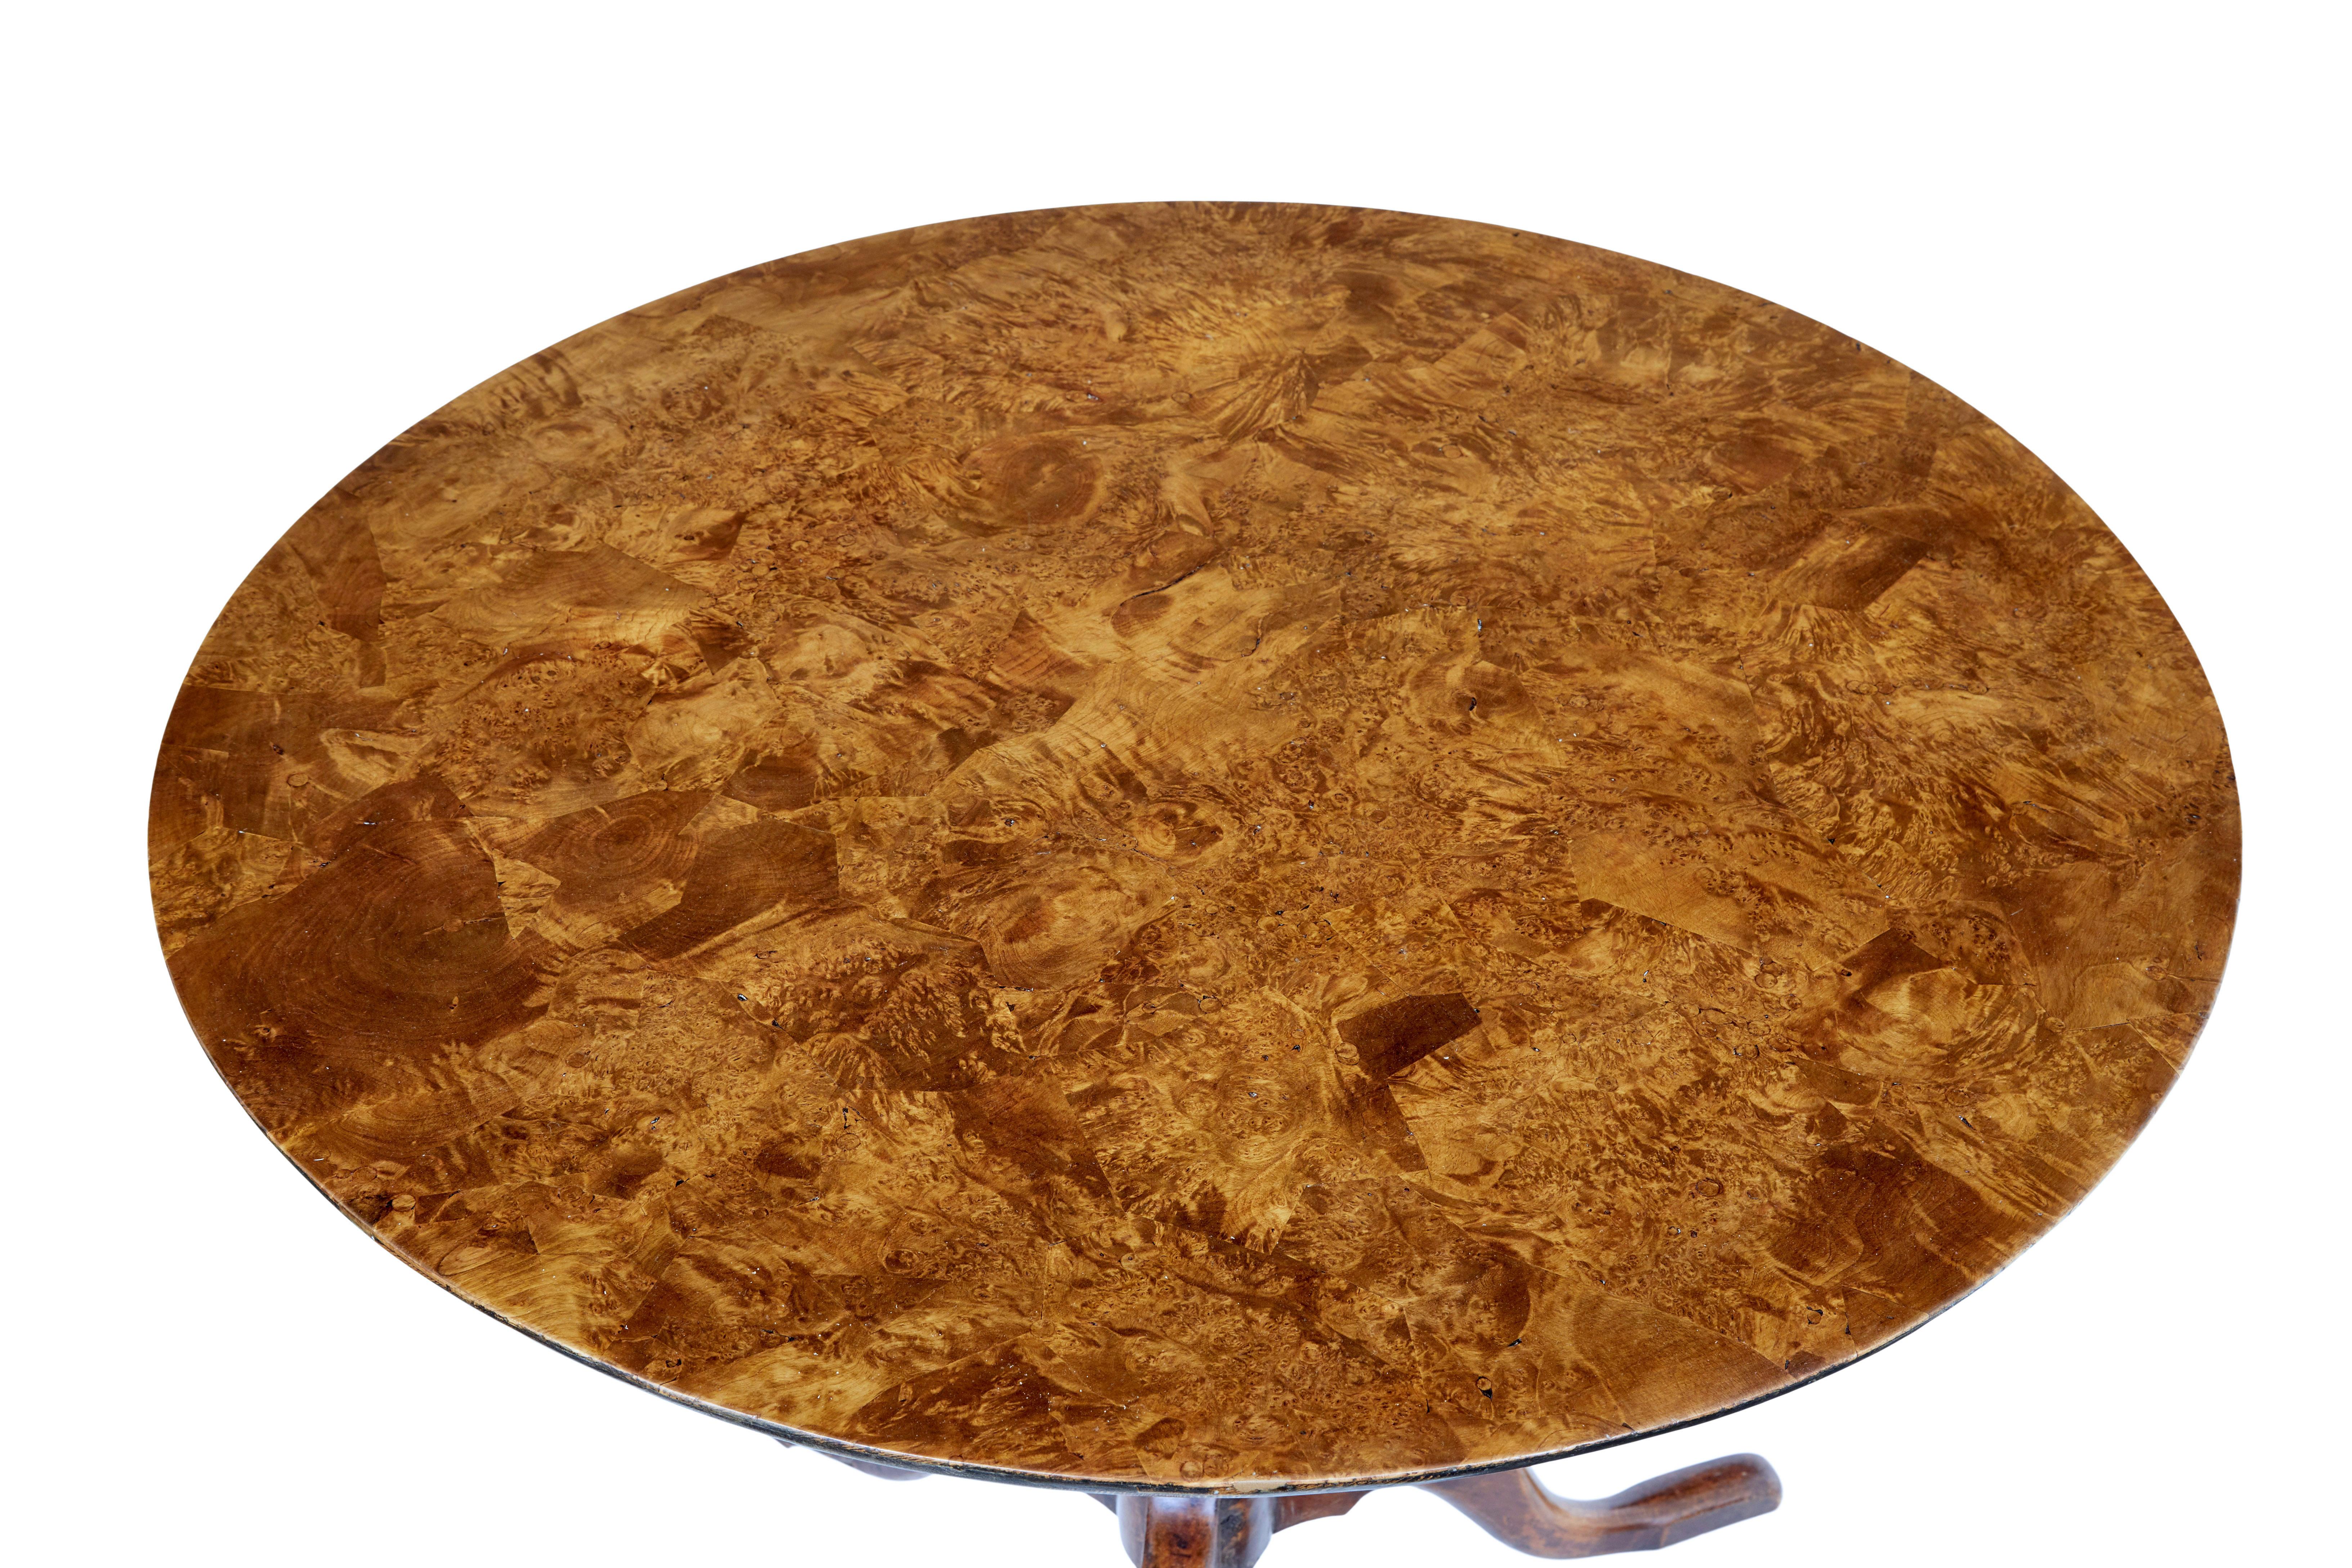 Swedish 19th century alder root tilt top table circa 1840.

Fine quality Swedish tilt top occasional table, circular top with arranged alder root veneers which form a striking top surface.  Top surface is held in place by a peg, which allows it to